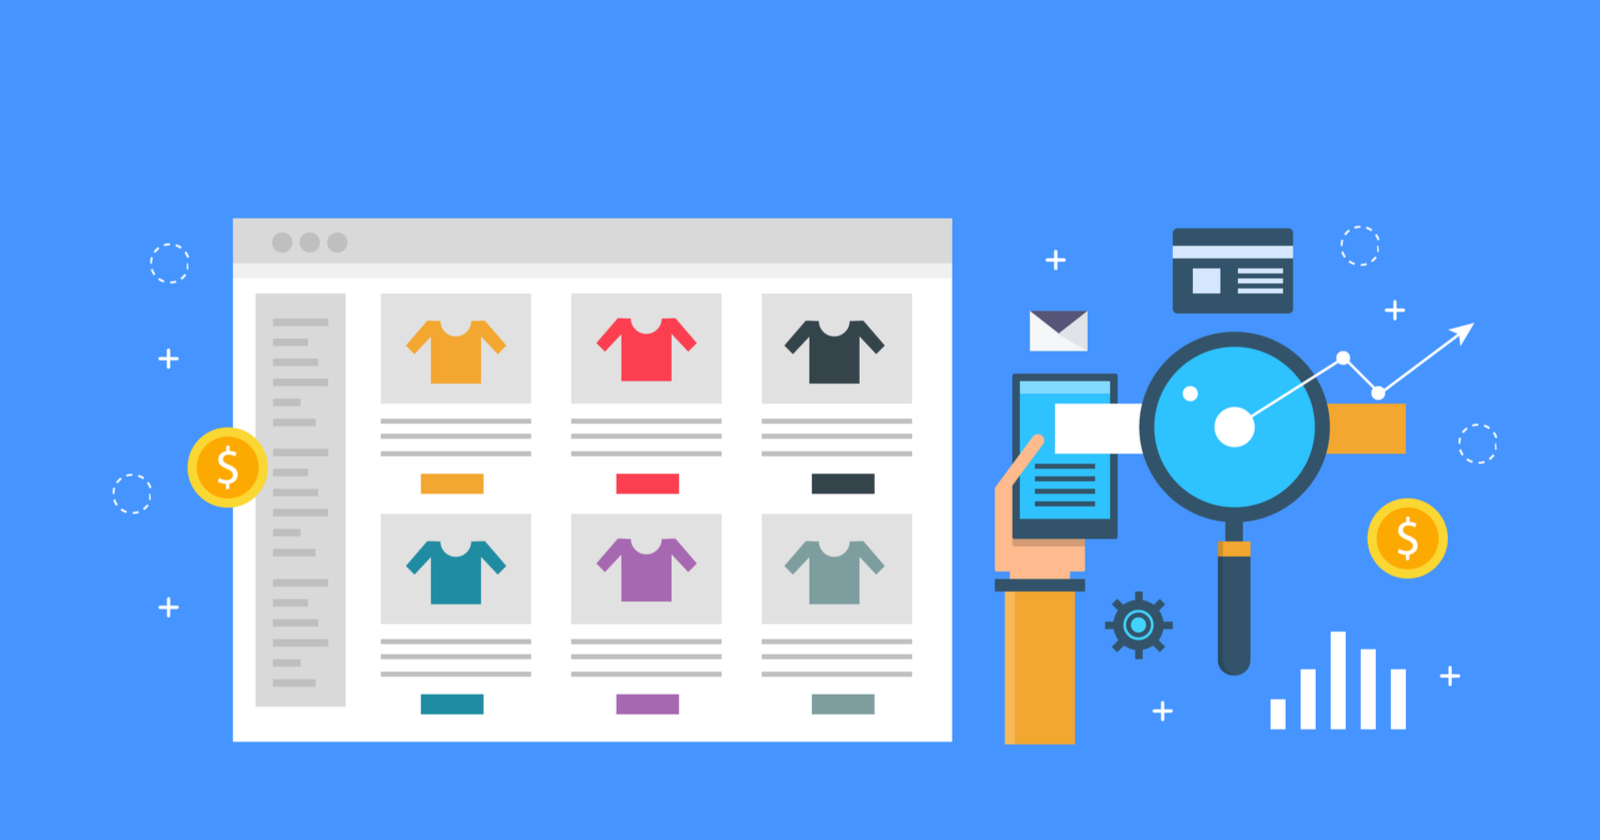 A 10-Point Ecommerce SEO Checklist for 2020